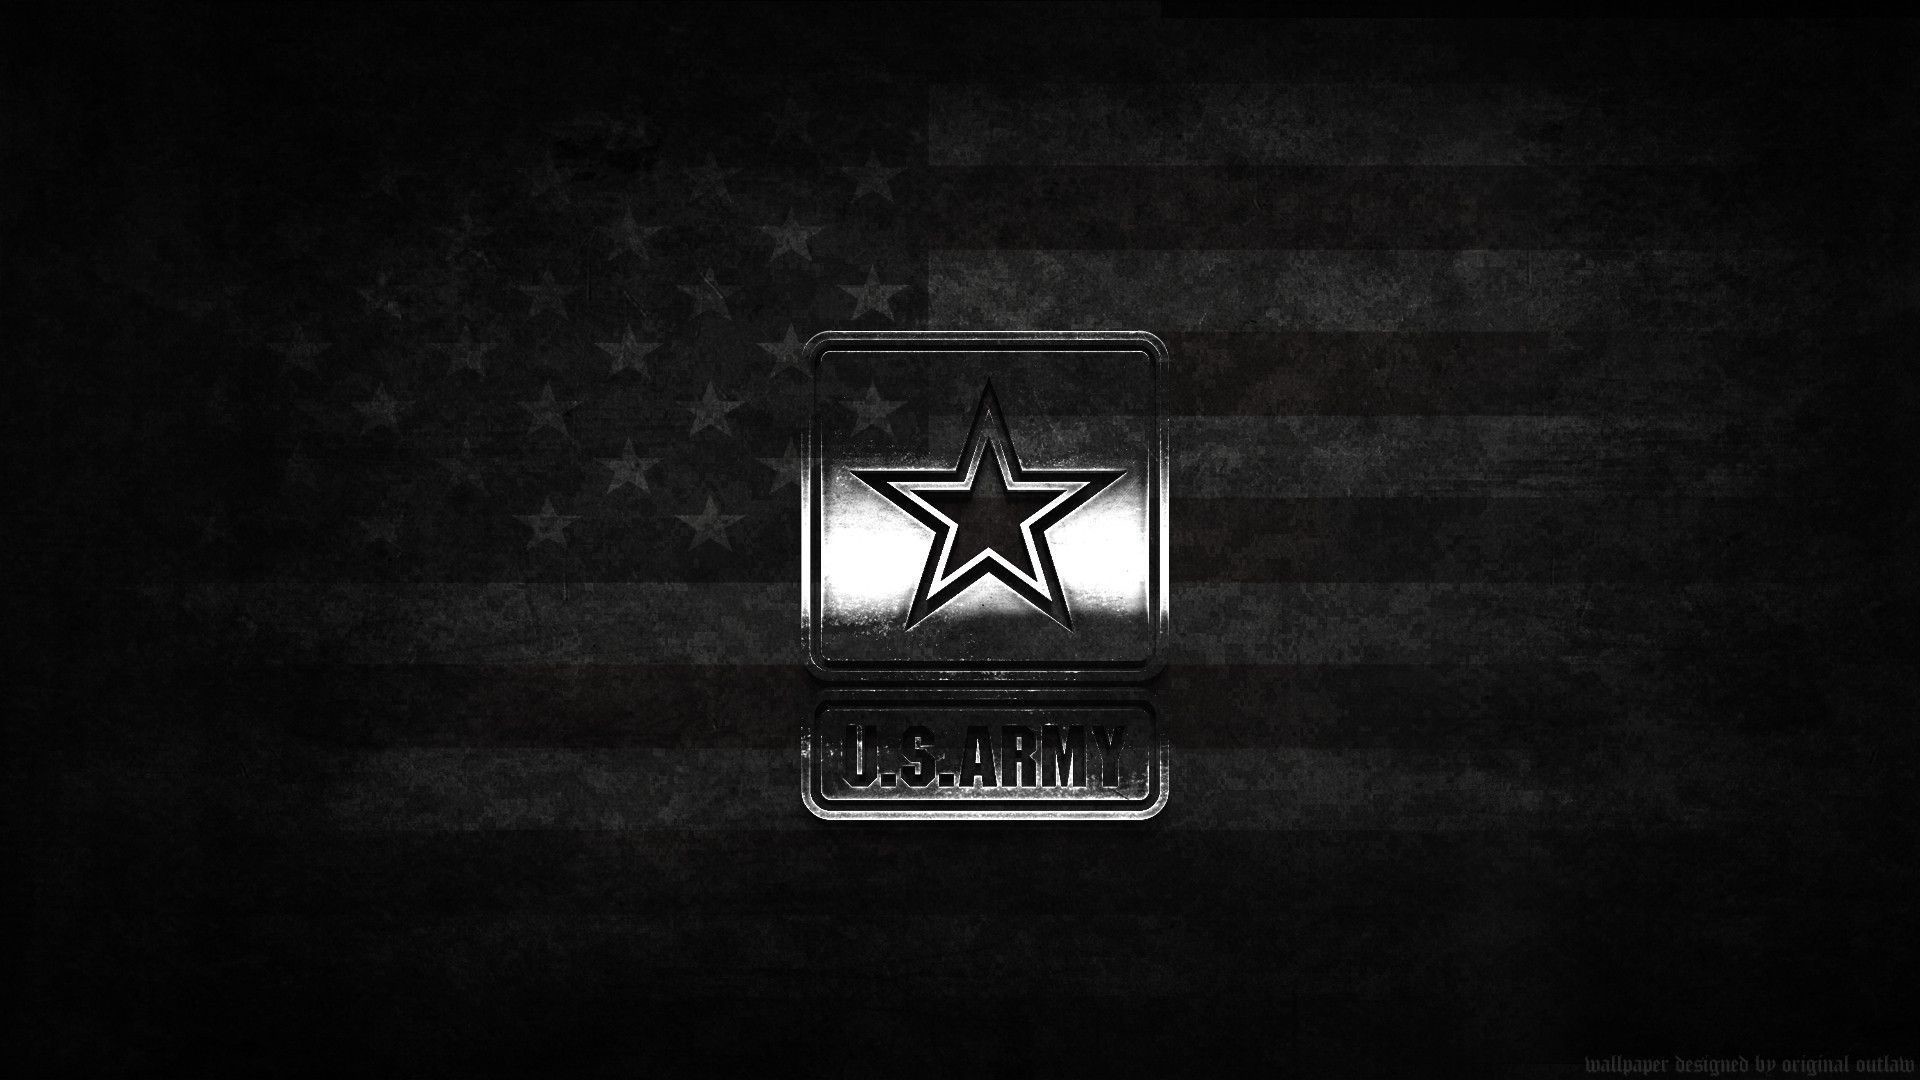 1920x1080 US Army Wallpaper Backgrounds - Wallpaper Cave